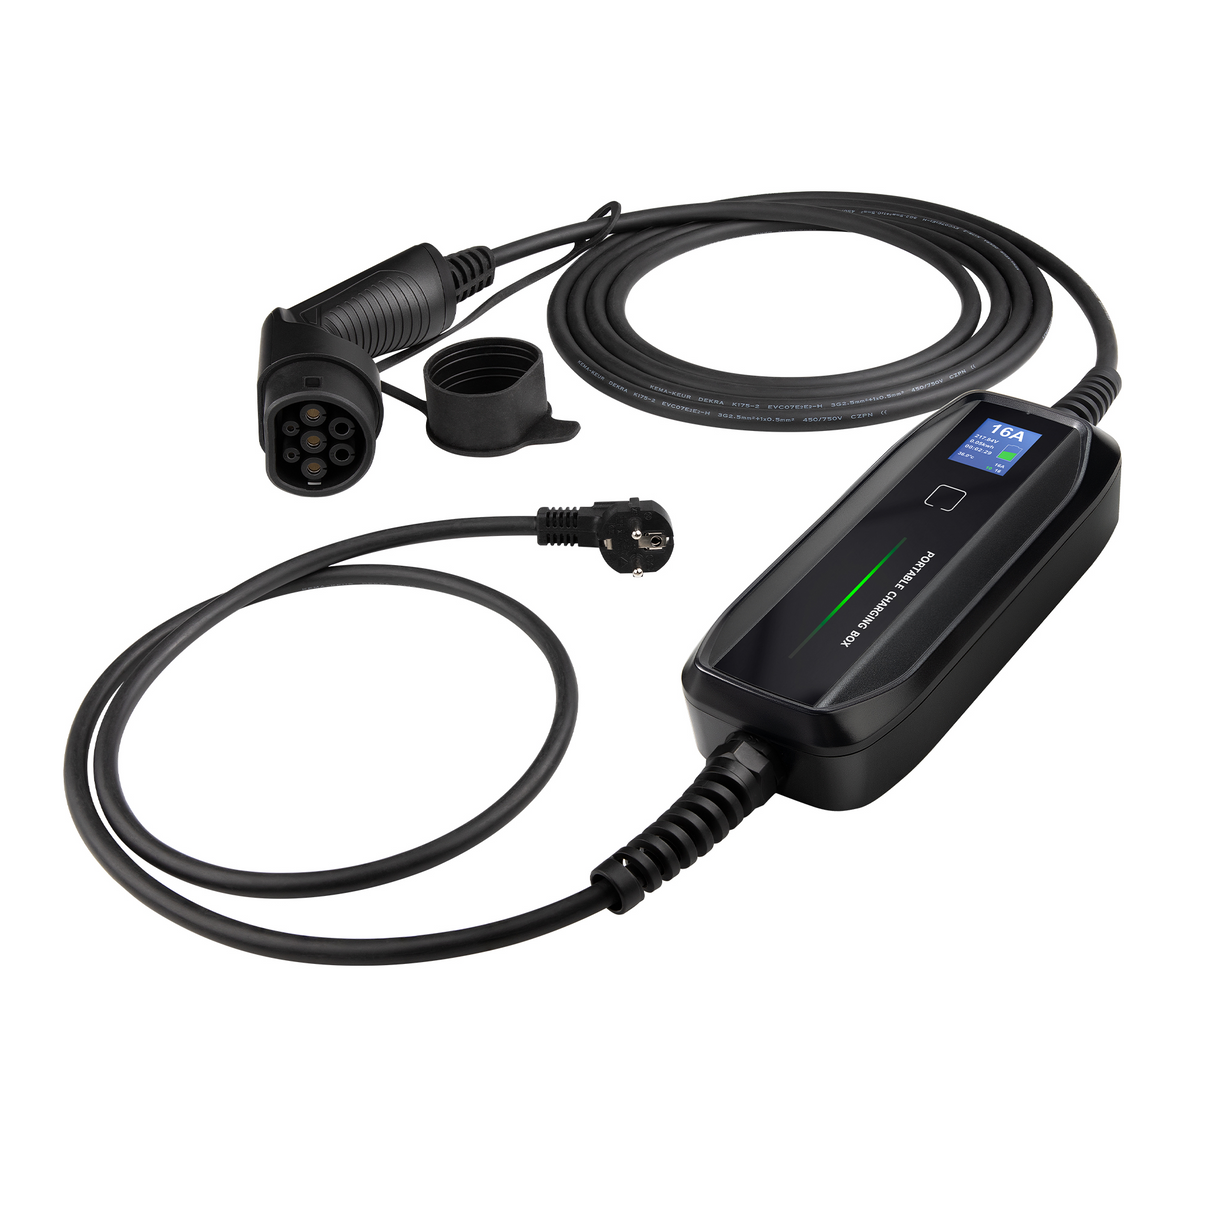 Mobile Charger Renault Twingo - Besen with LCD - Type 2 to Schuko